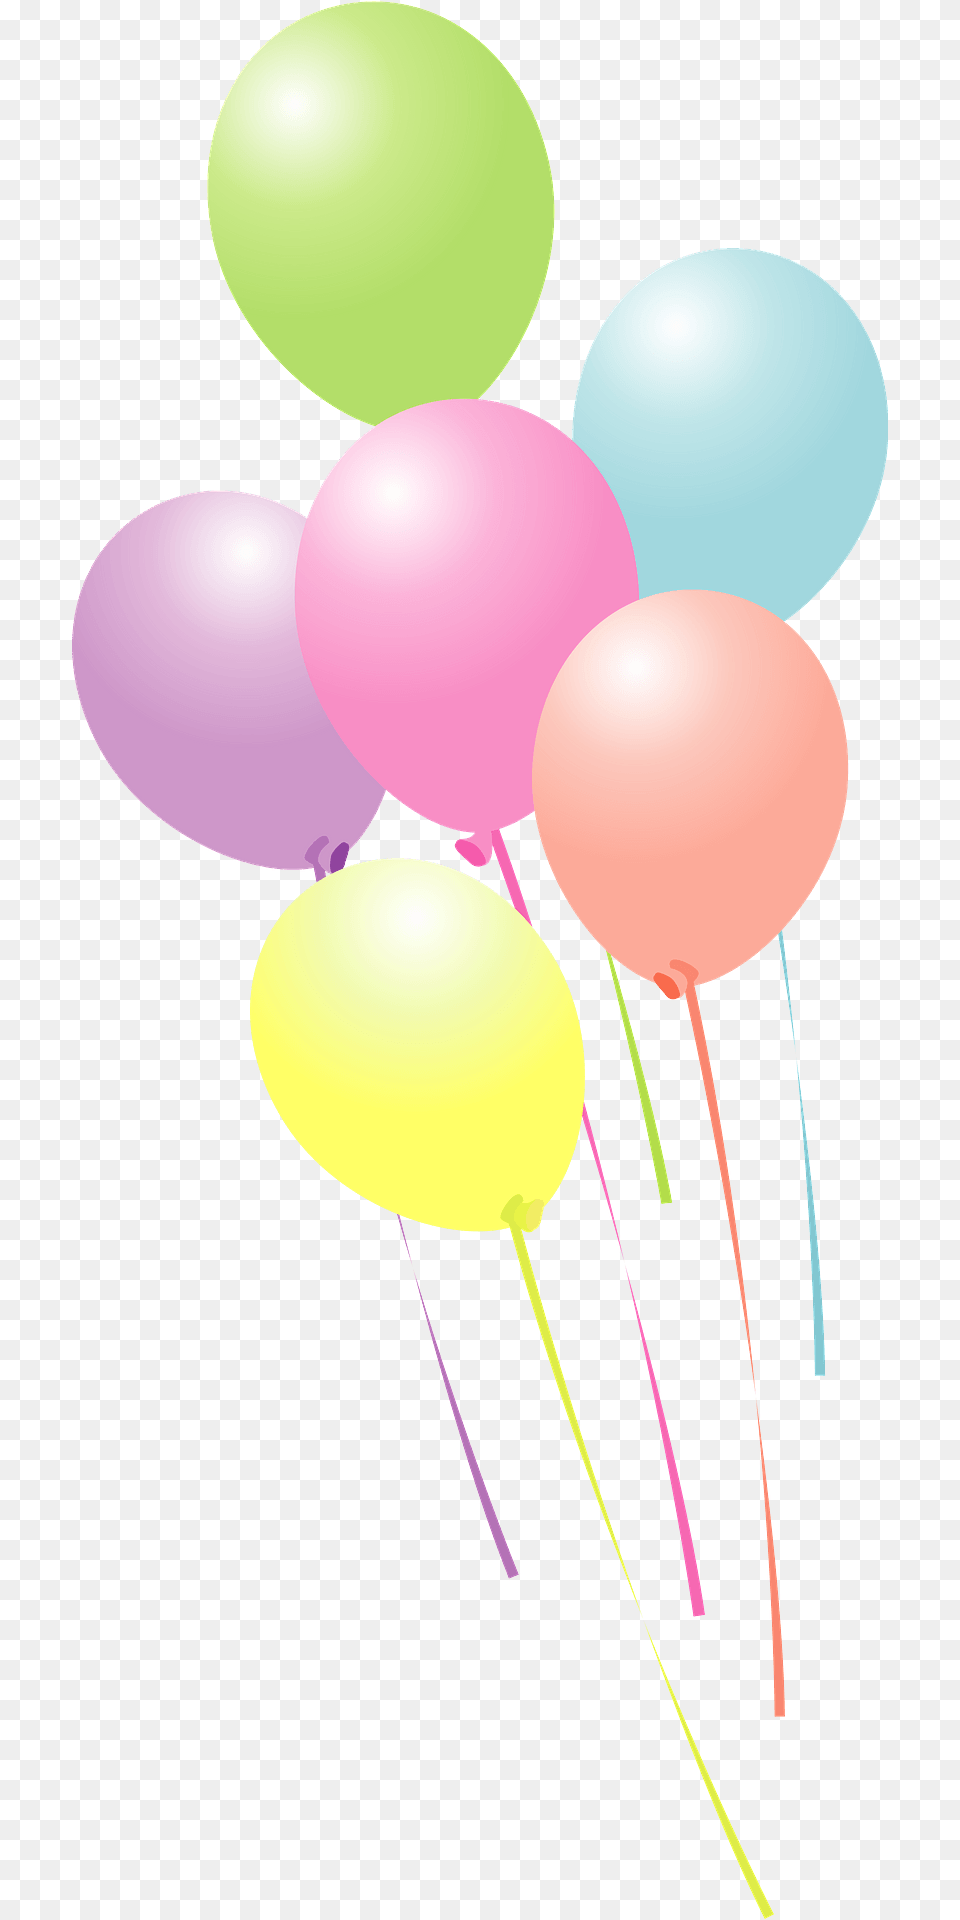 Rainbow Of Balloons Clipart, Balloon Png Image